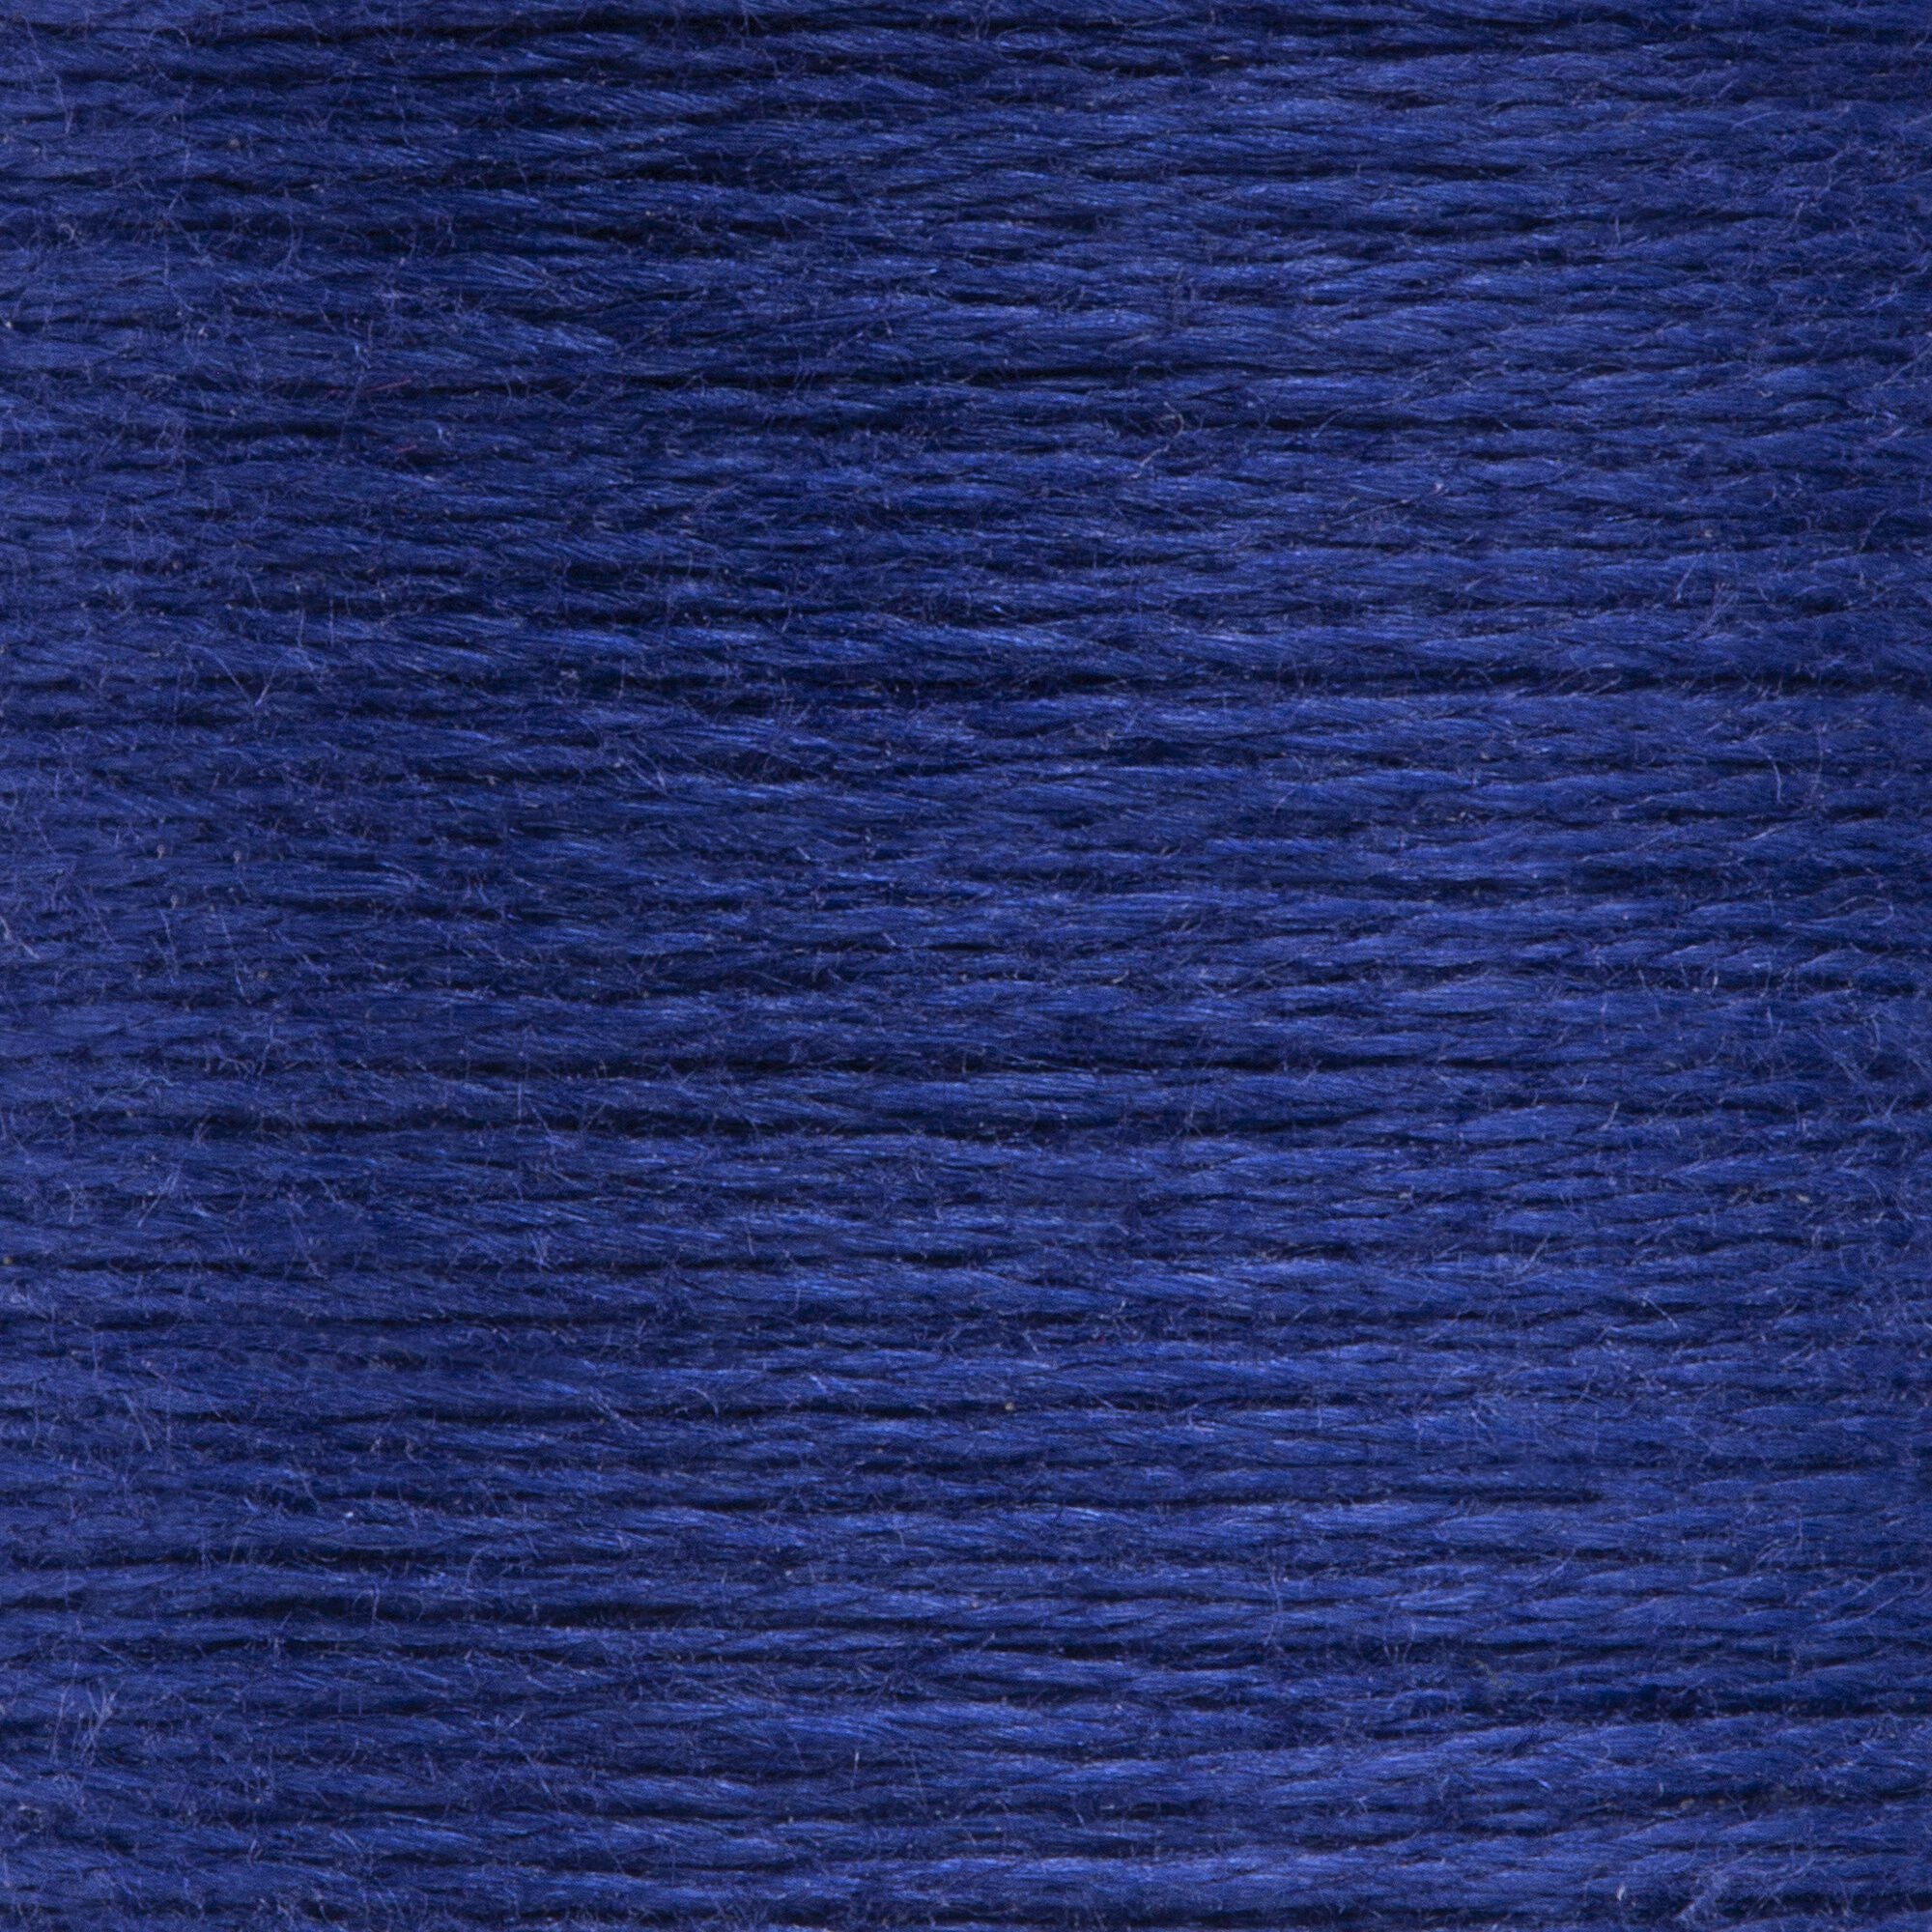 Anchor Embroidery Floss in Ocean Blue D